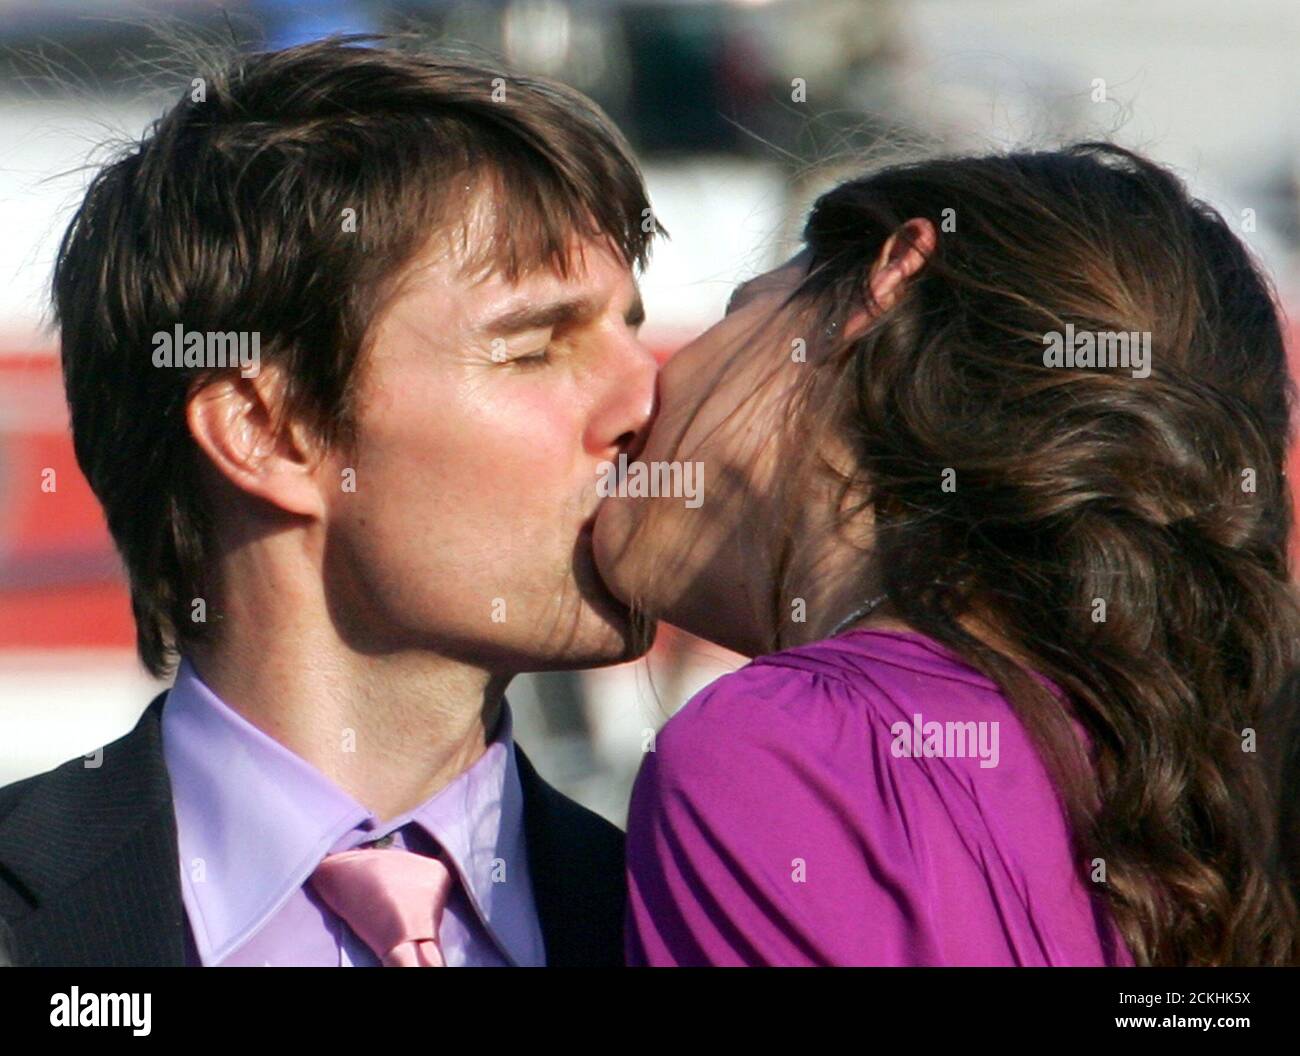 Hollywood film star Tom Cruise kisses US actress Katie Holmes as he arrives  for the French premiere of his latest movie in Marseille. Hollywood film  star Tom Cruise (L) kisses U.S. actress